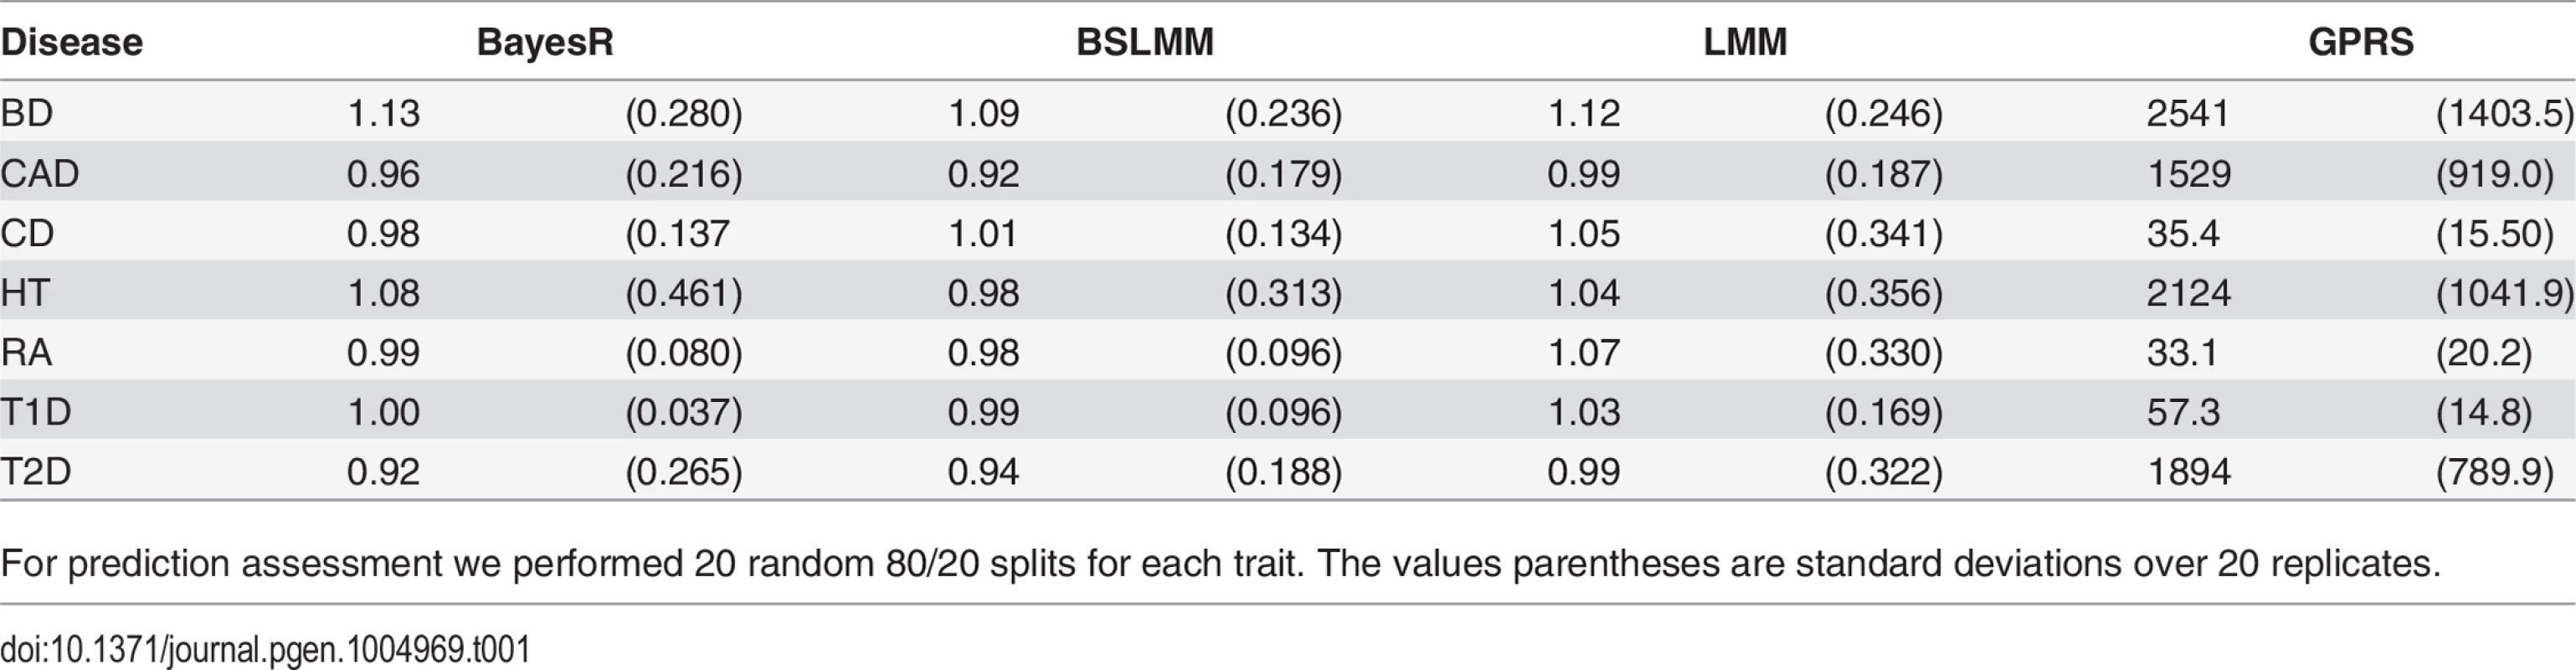 Regression of phenotype on predicted value for BayesR, BSLMM, LMM and GPRS in WTCCC data.